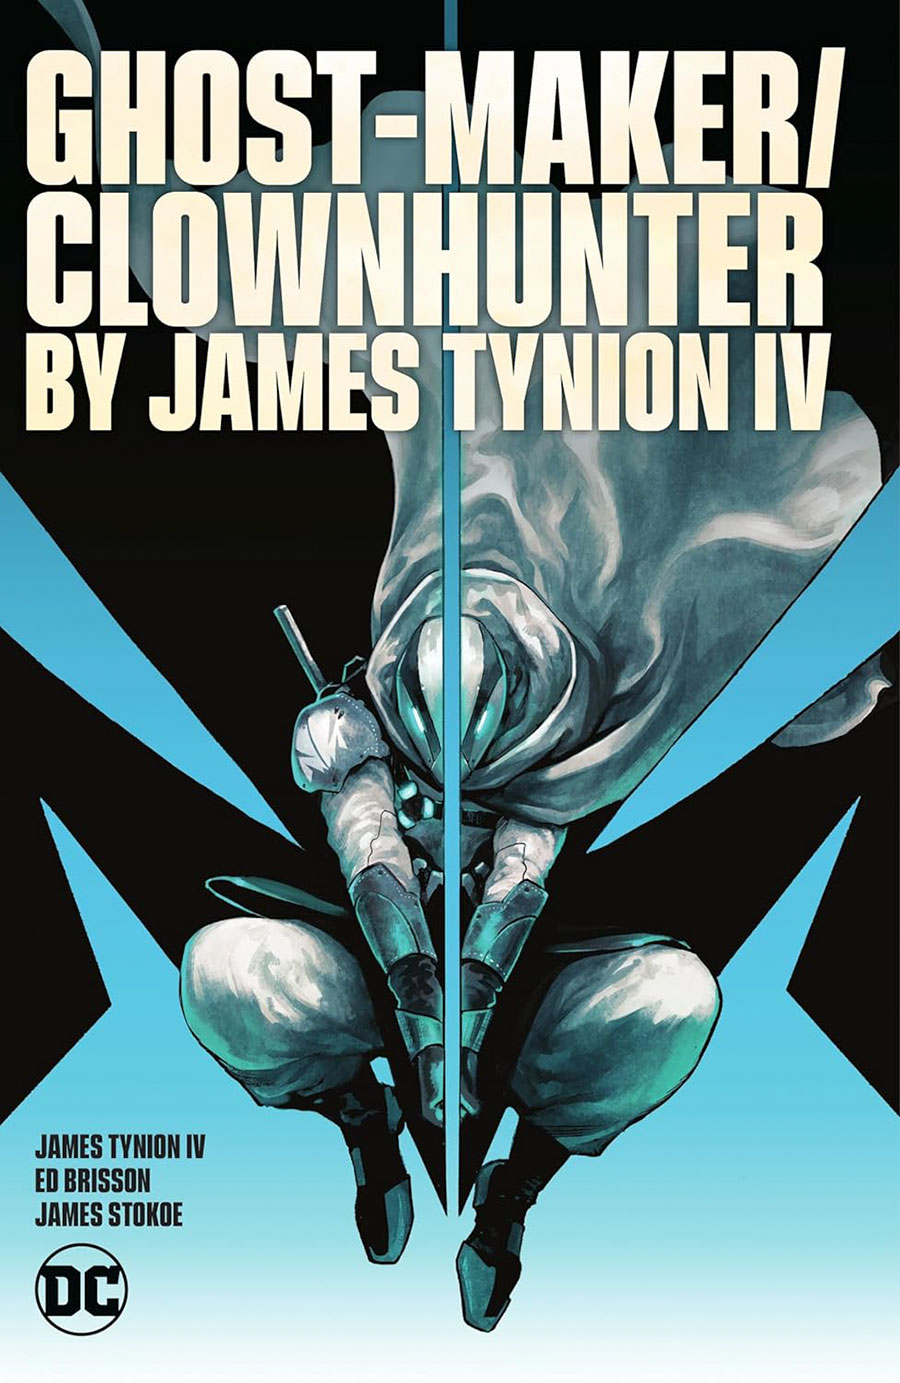 Ghost-Maker / Clownhunter By James Tynion IV TP